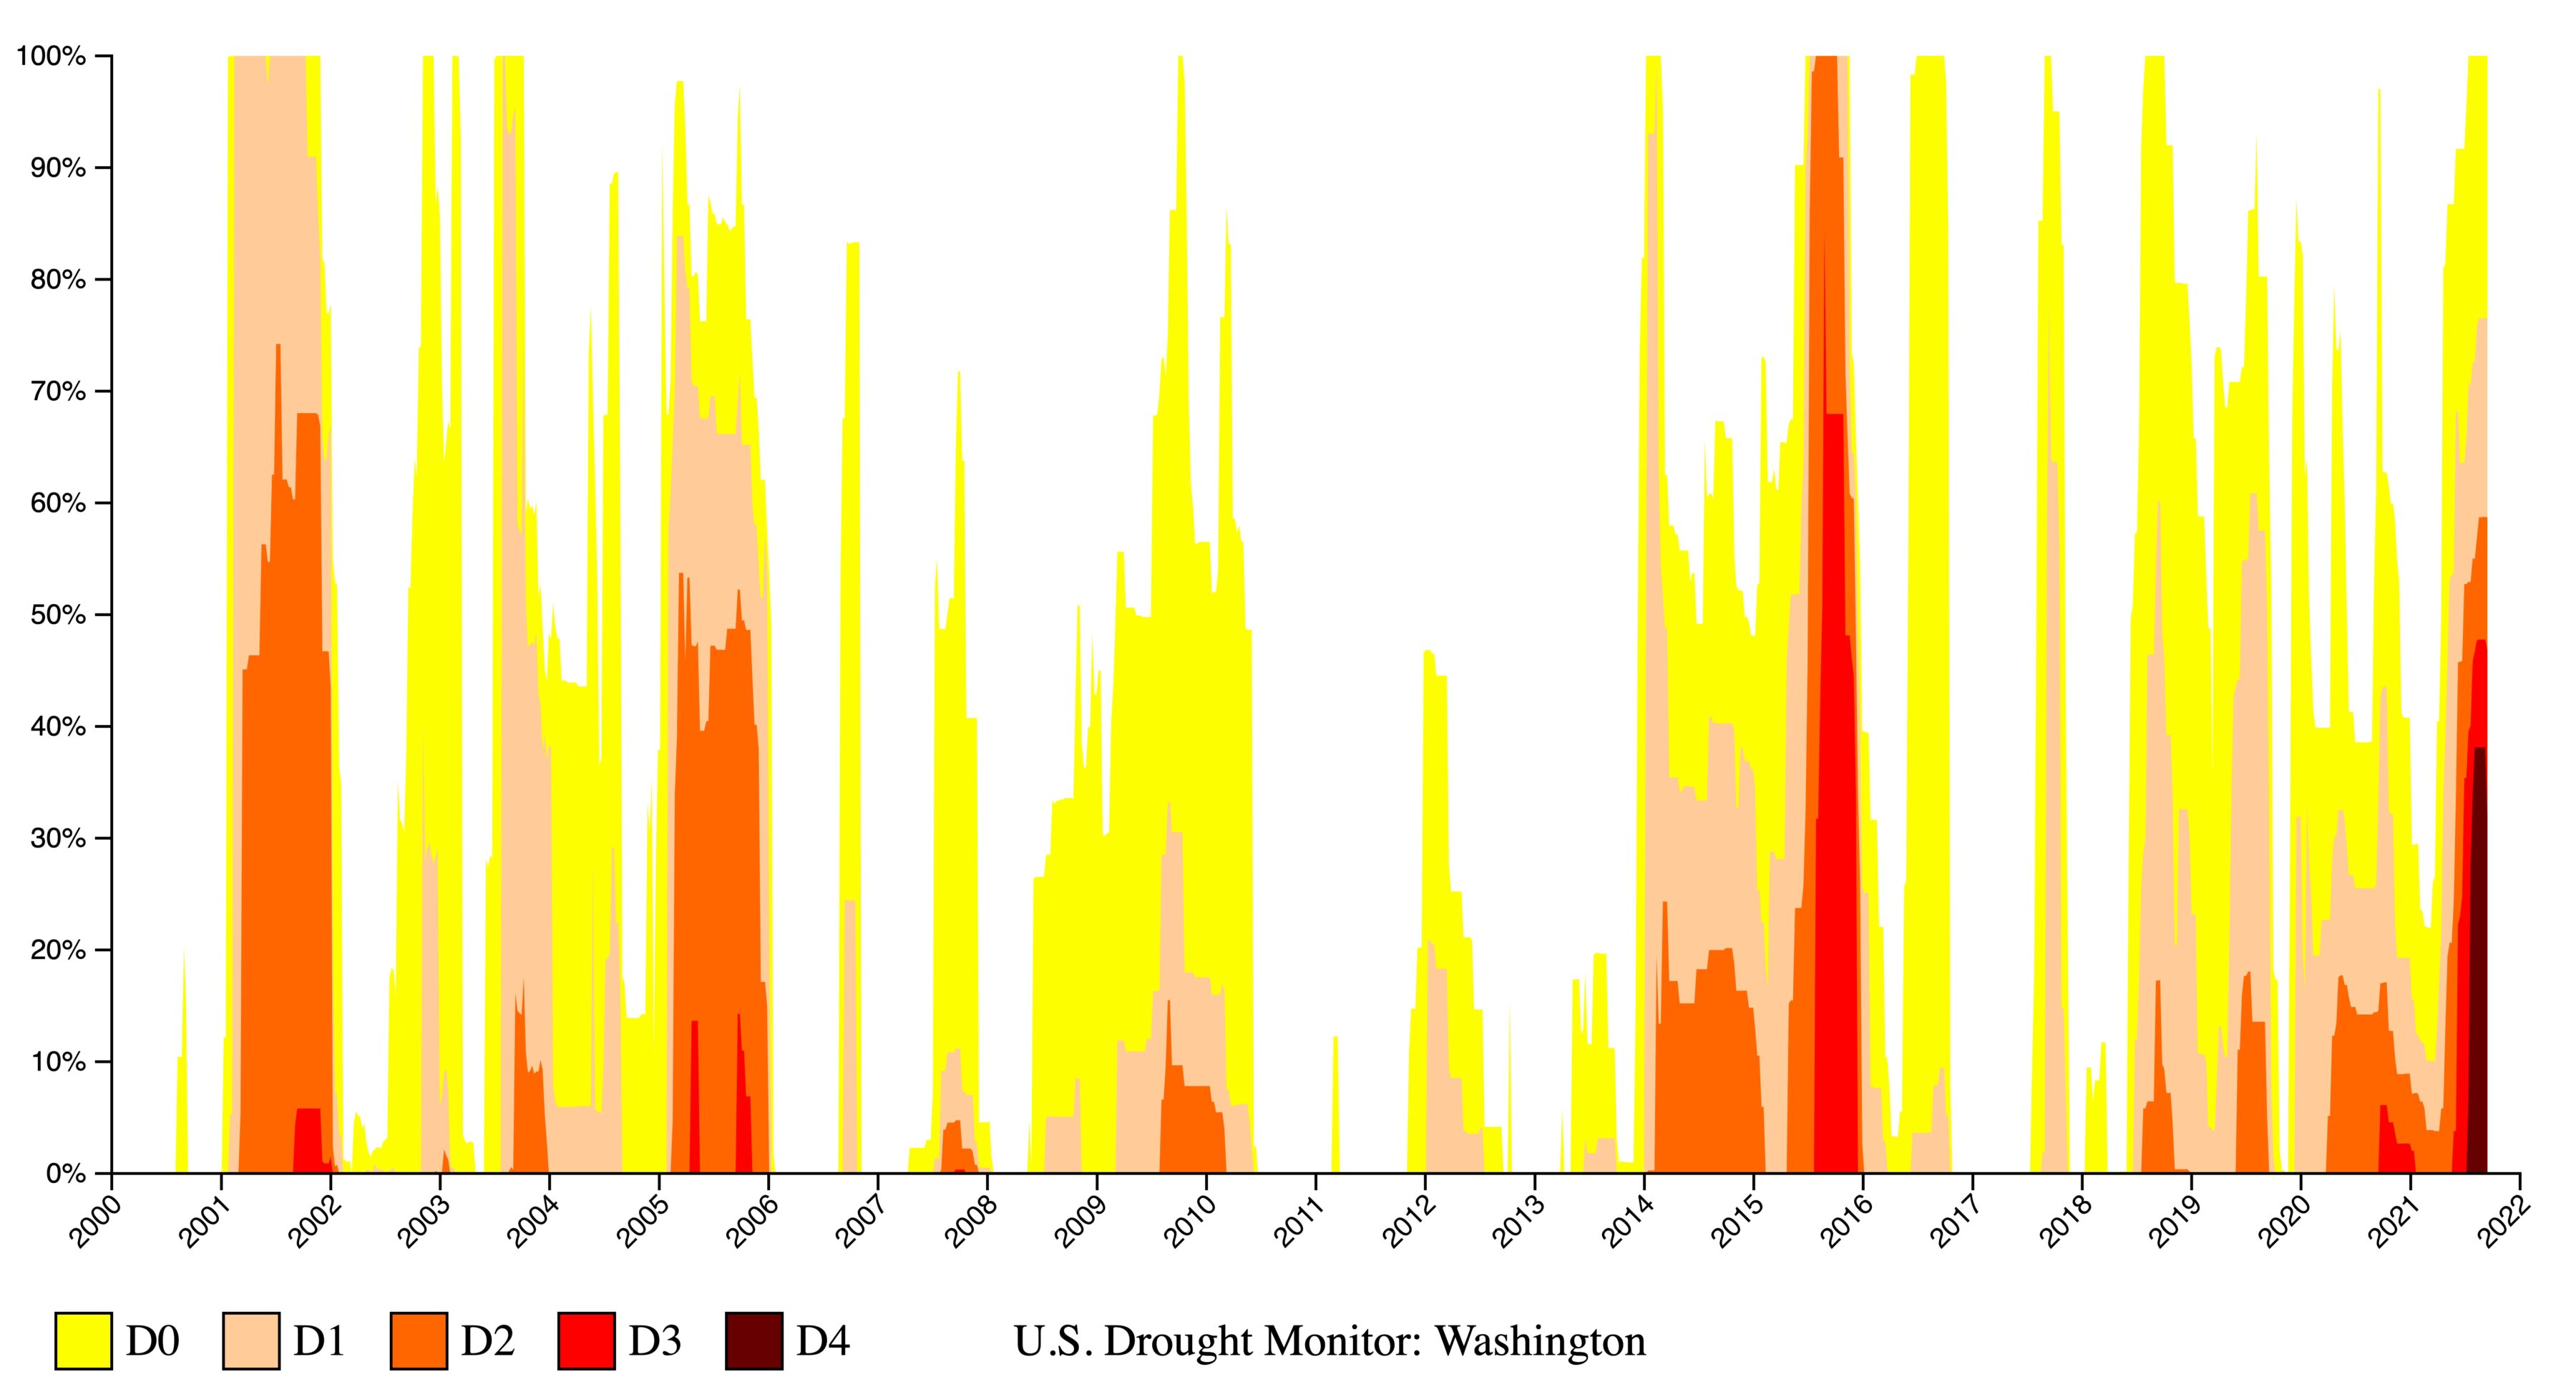 Drought chart by the US drought monitor showing 20 years of drought tracking in Washington state